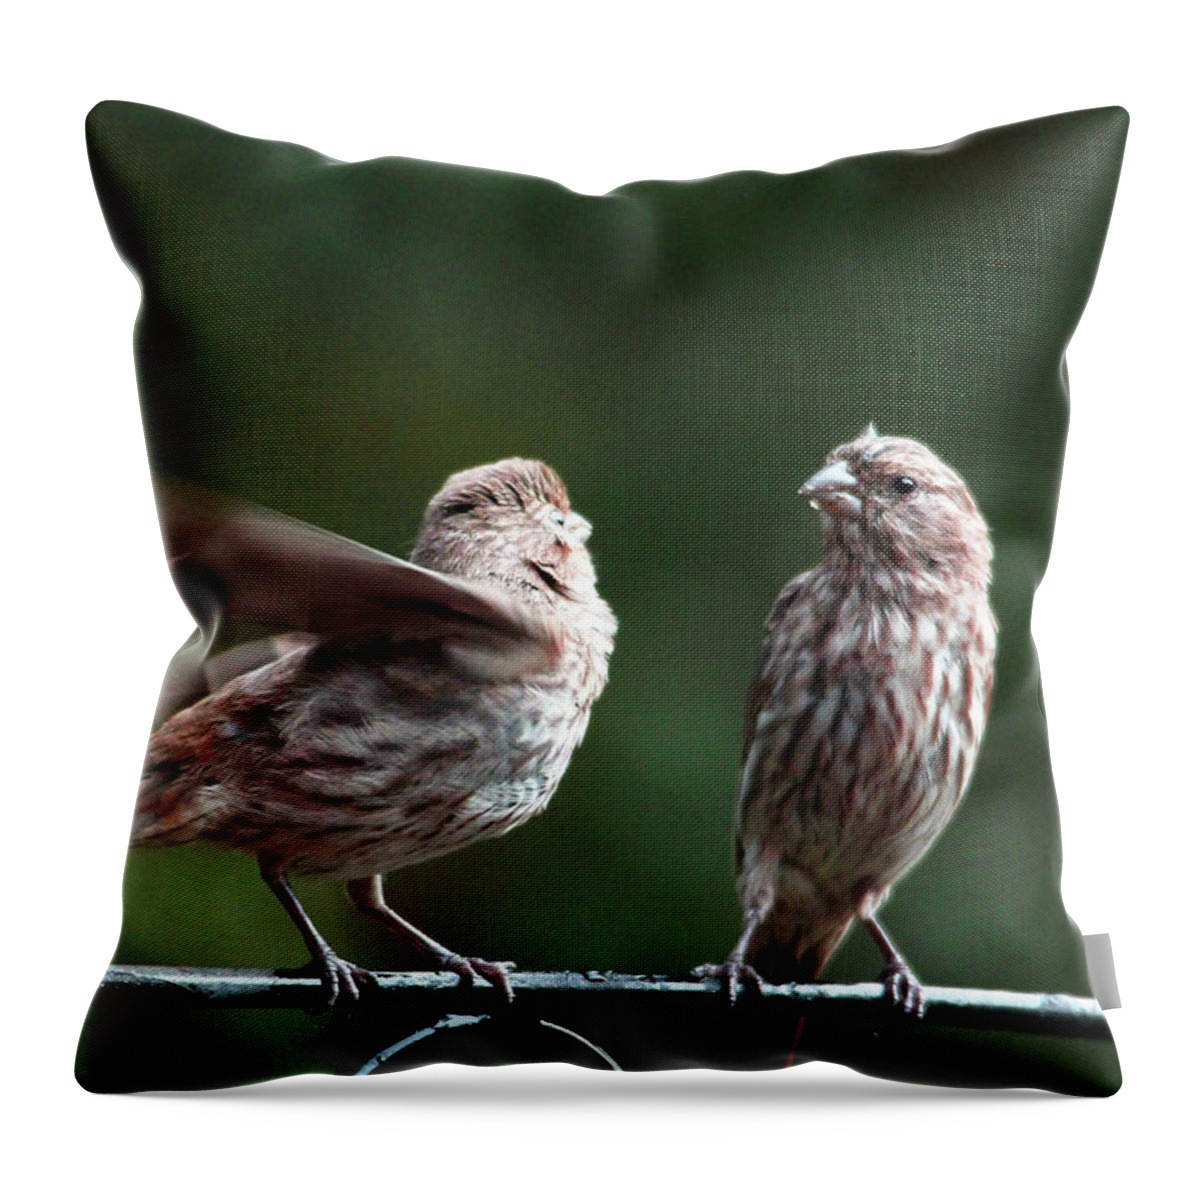 Birds Throw Pillow featuring the photograph It's My Turn by Trina Ansel